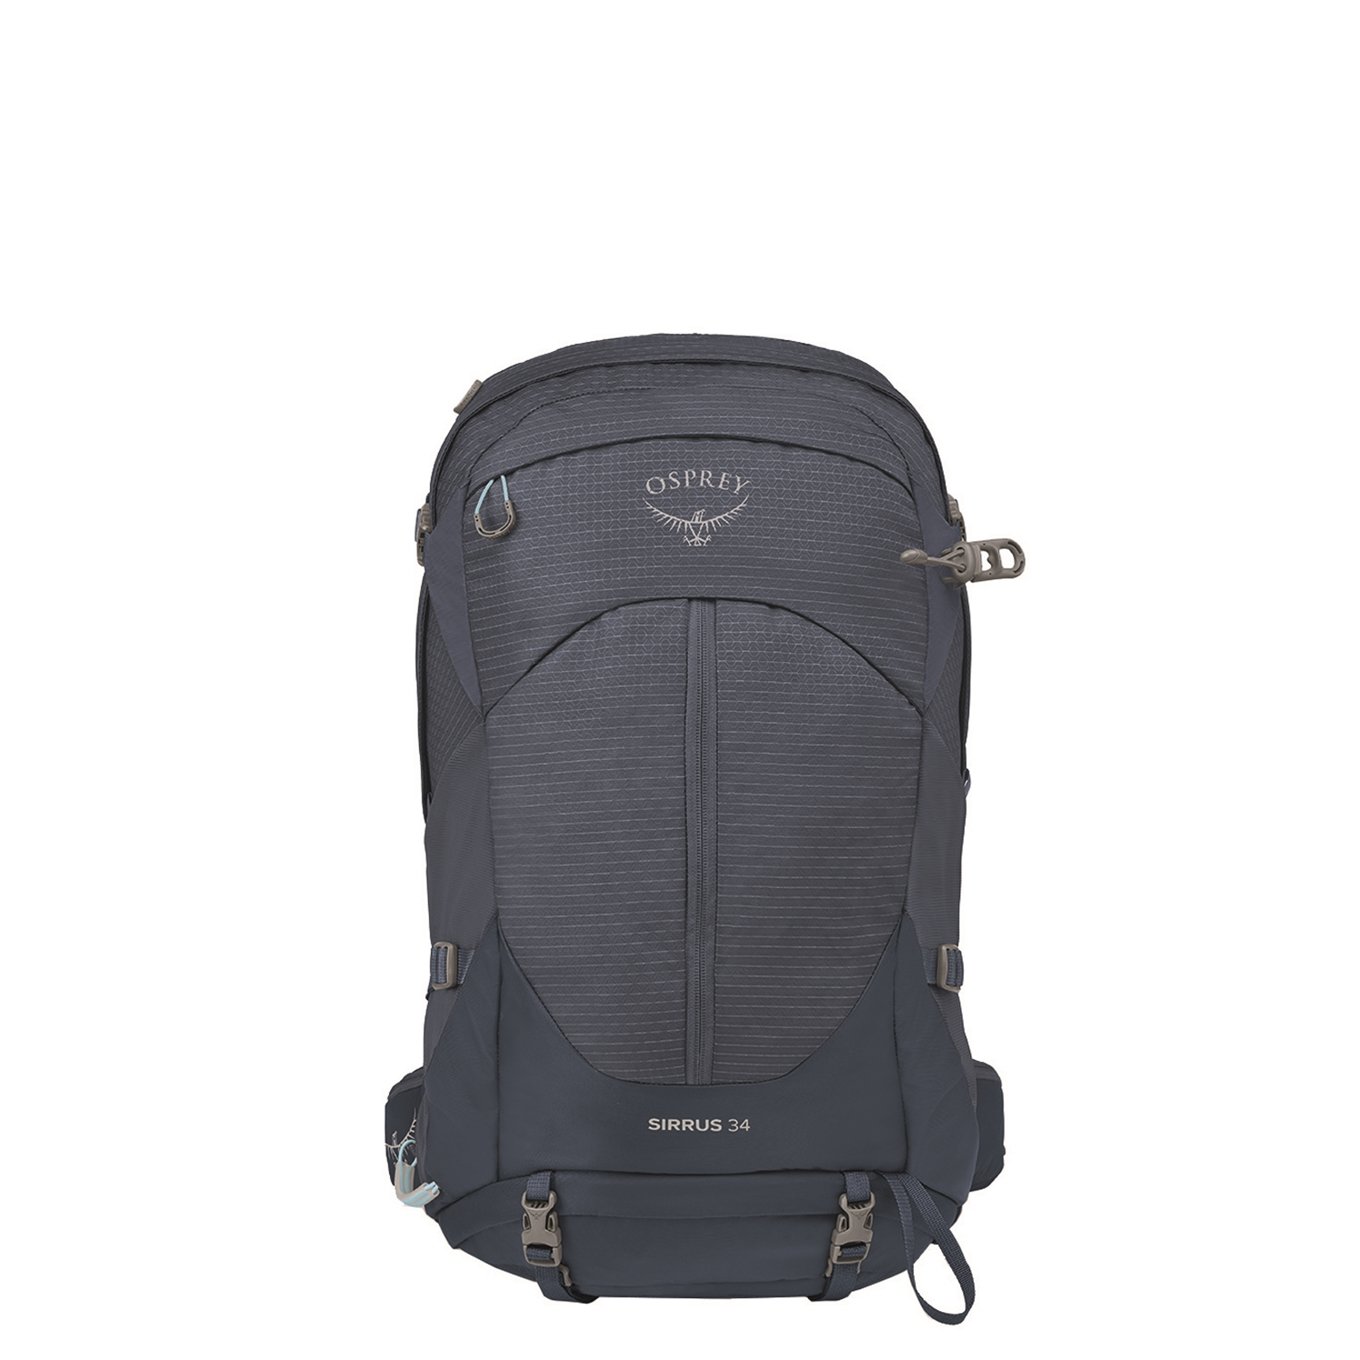 Osprey Sirrus 34 Backpack muted space blue backpack